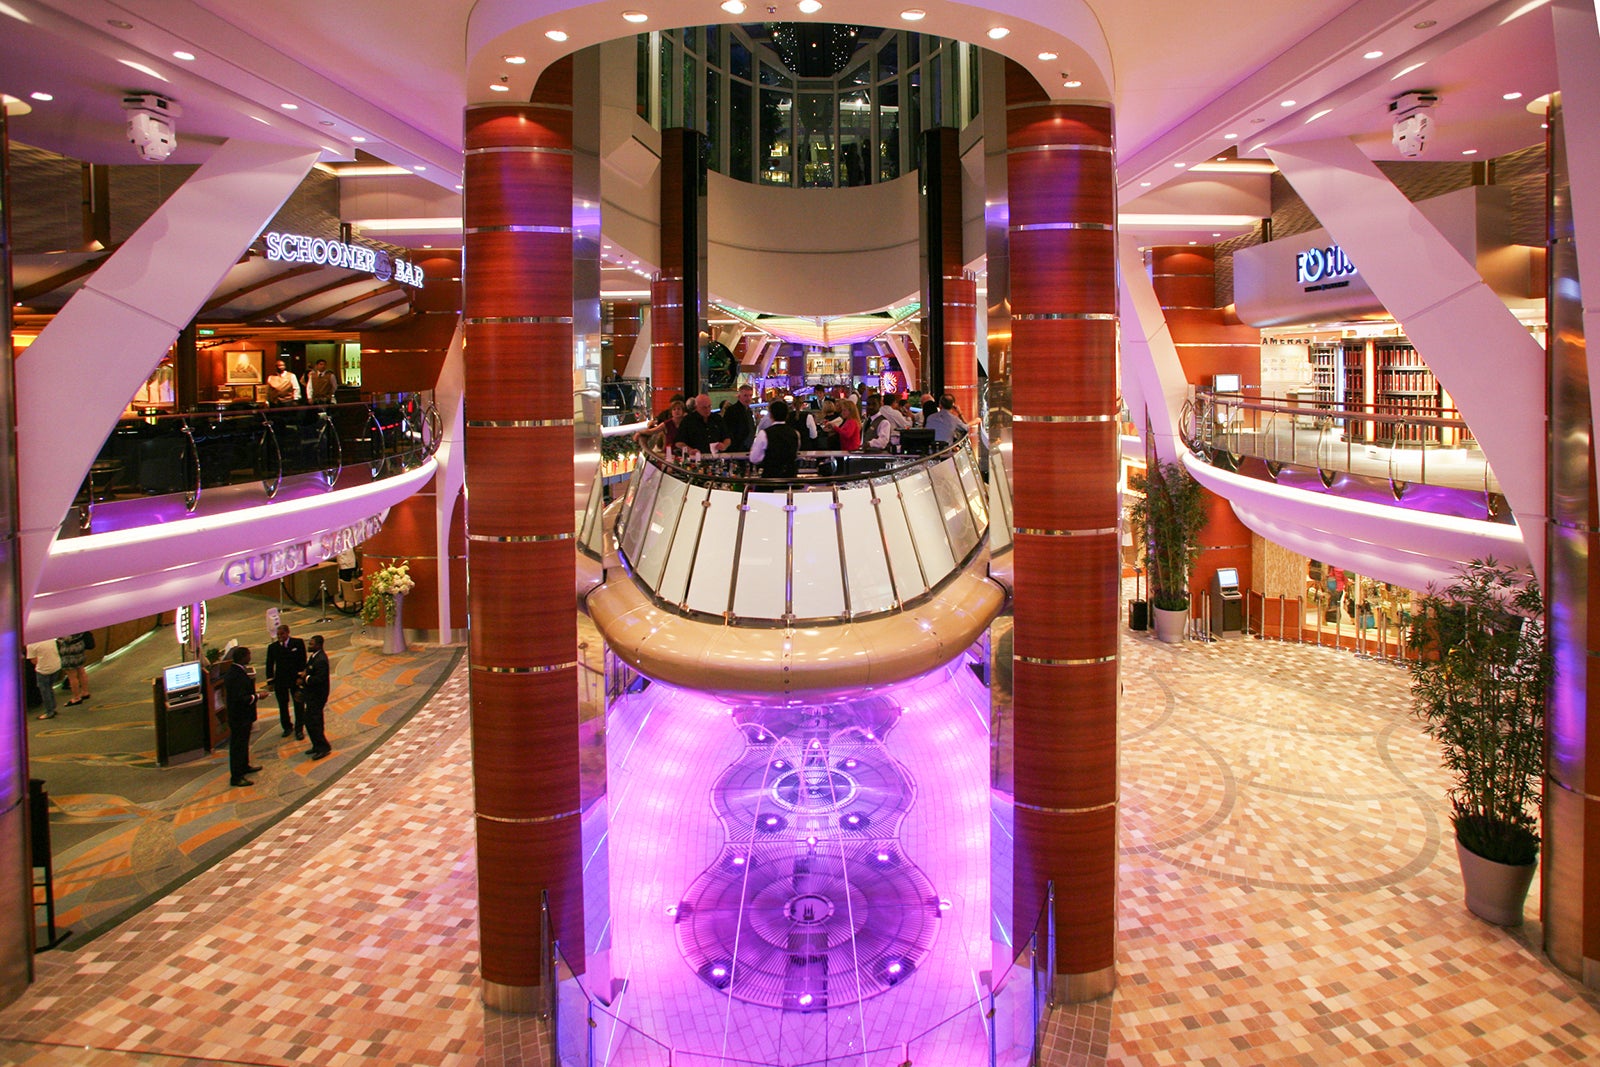 A bar with a fountain underneath it levitating on hydraulics in the middle of a shopping mall-like promenade on a cruise ship